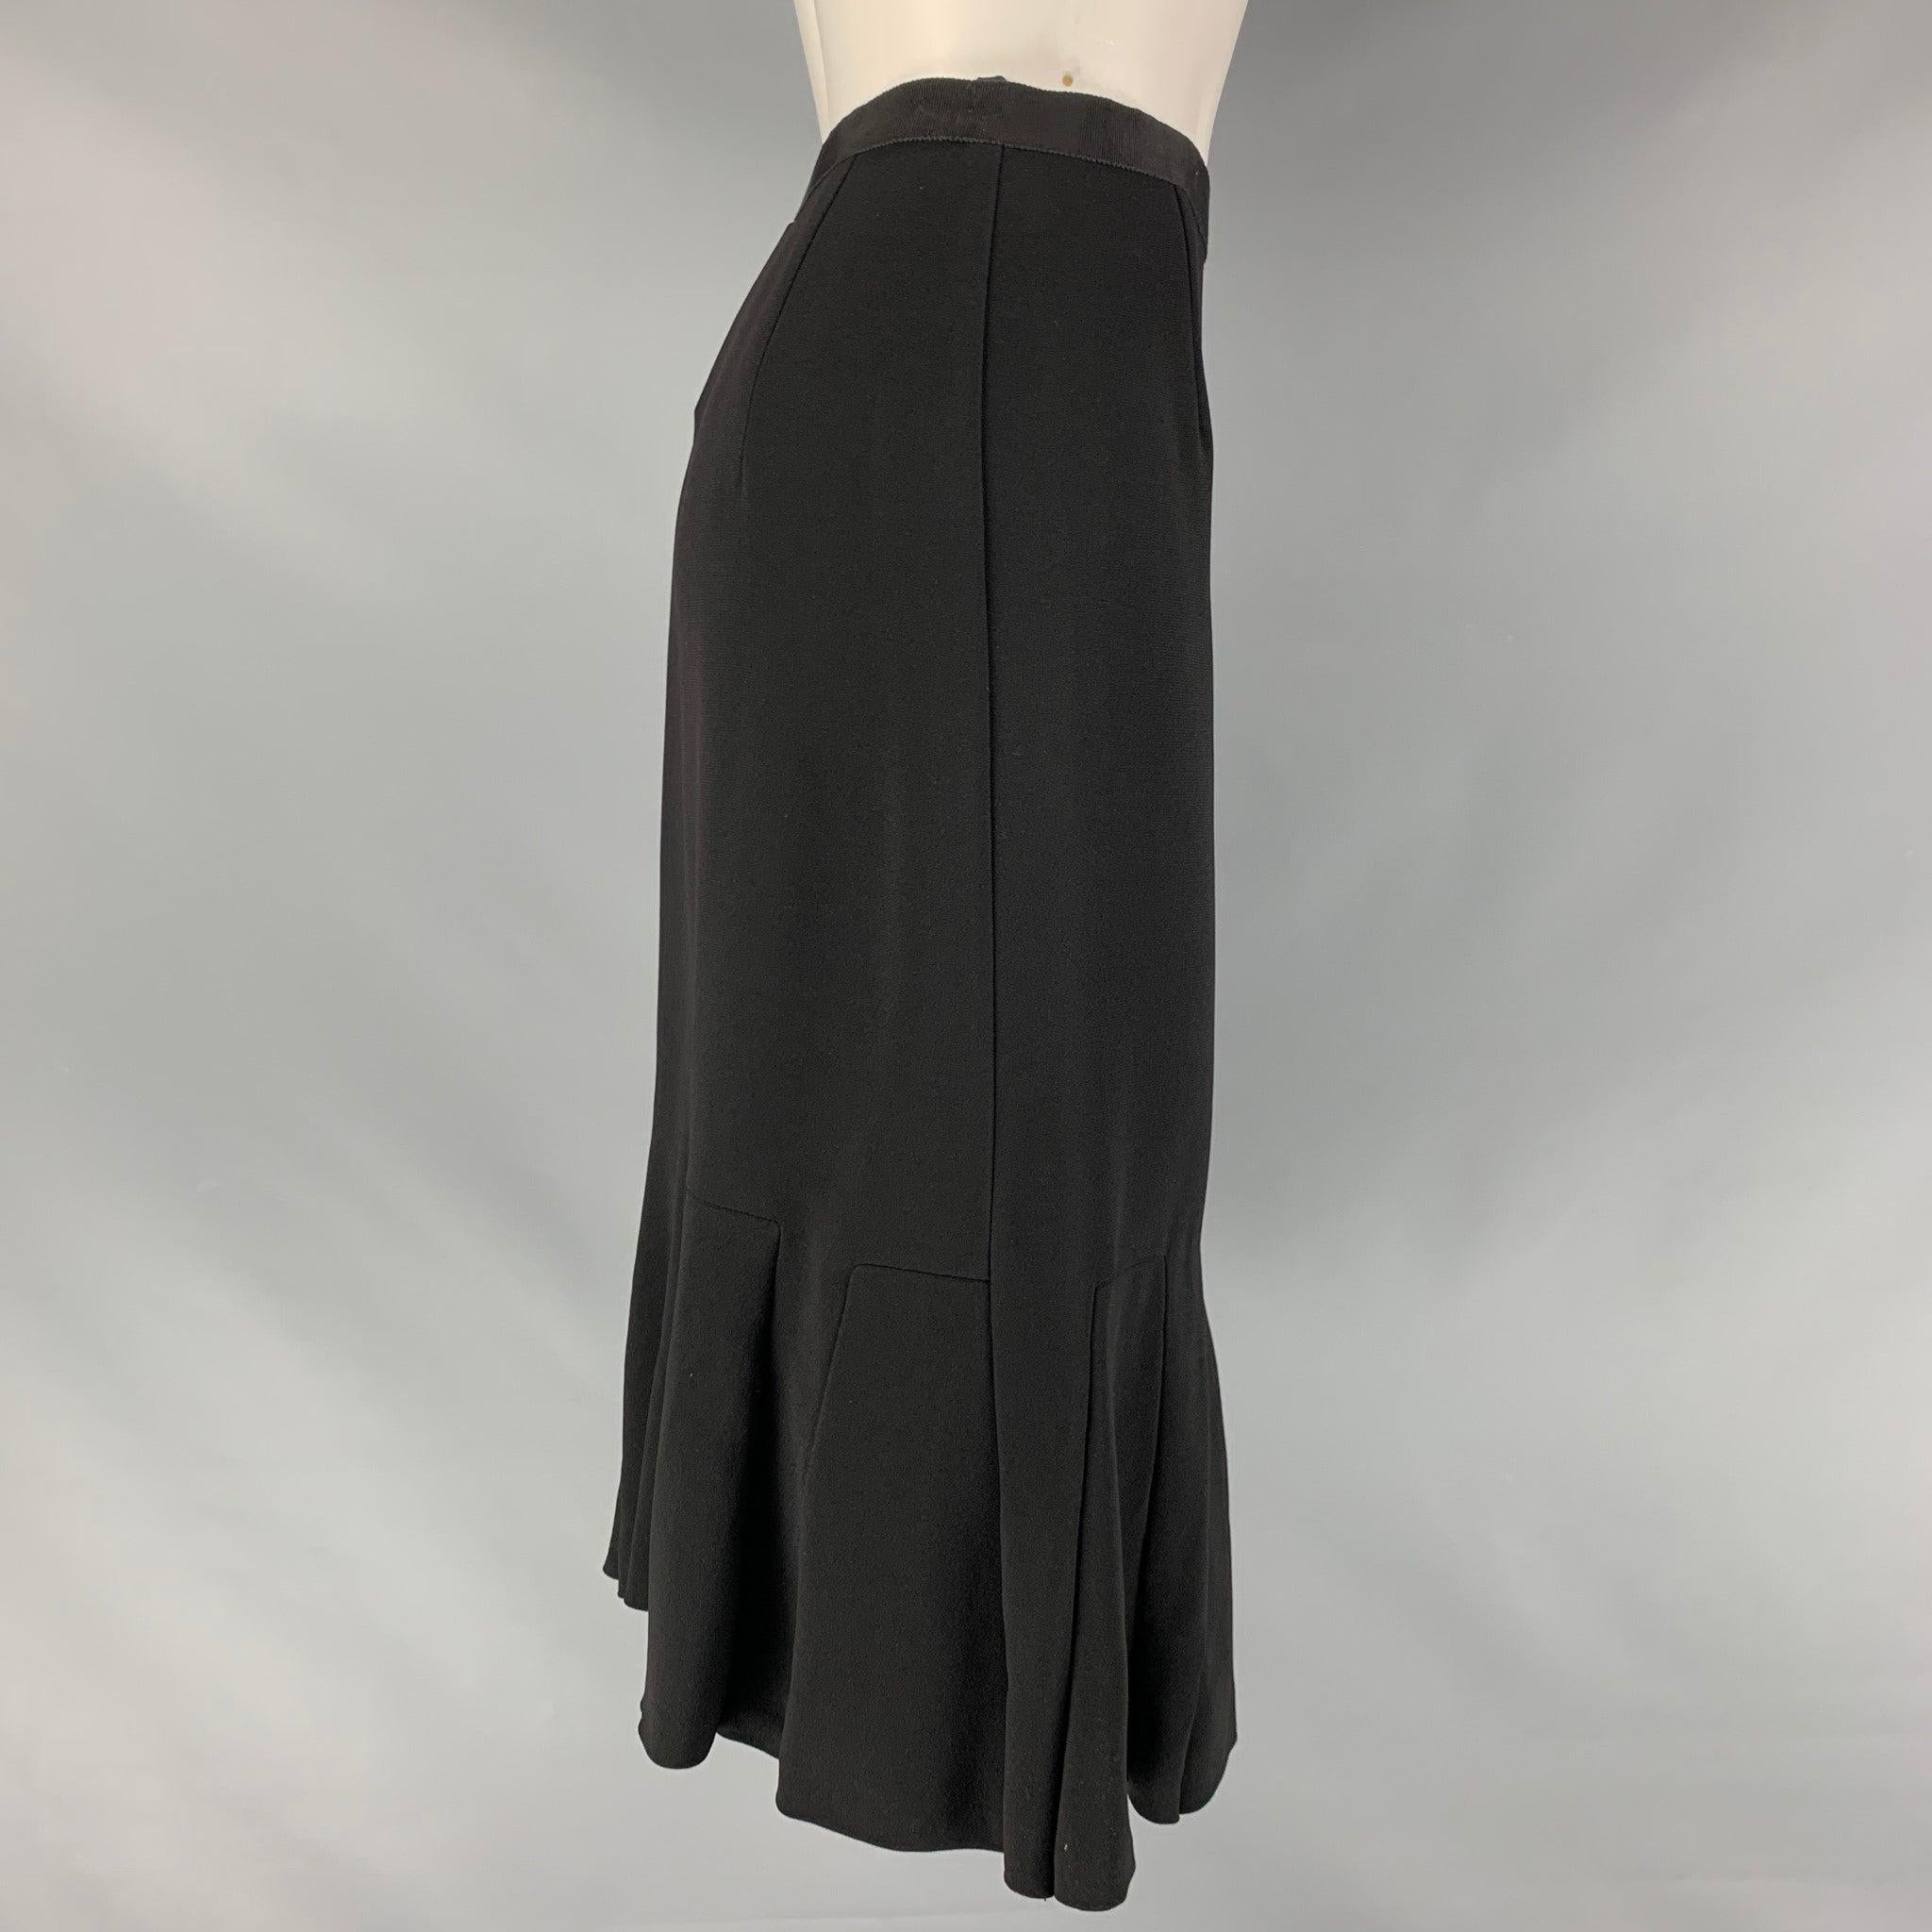 PRADA tulip skirt comes in a black acetate and viscose material featuring a ruffled hem, and a side seam invisible zip up closure. Made in Italy.Good Pre-Owned Condition. Moderate Fading at waistband. As- is. 

Marked:   40 

Measurements: 
  Waist: